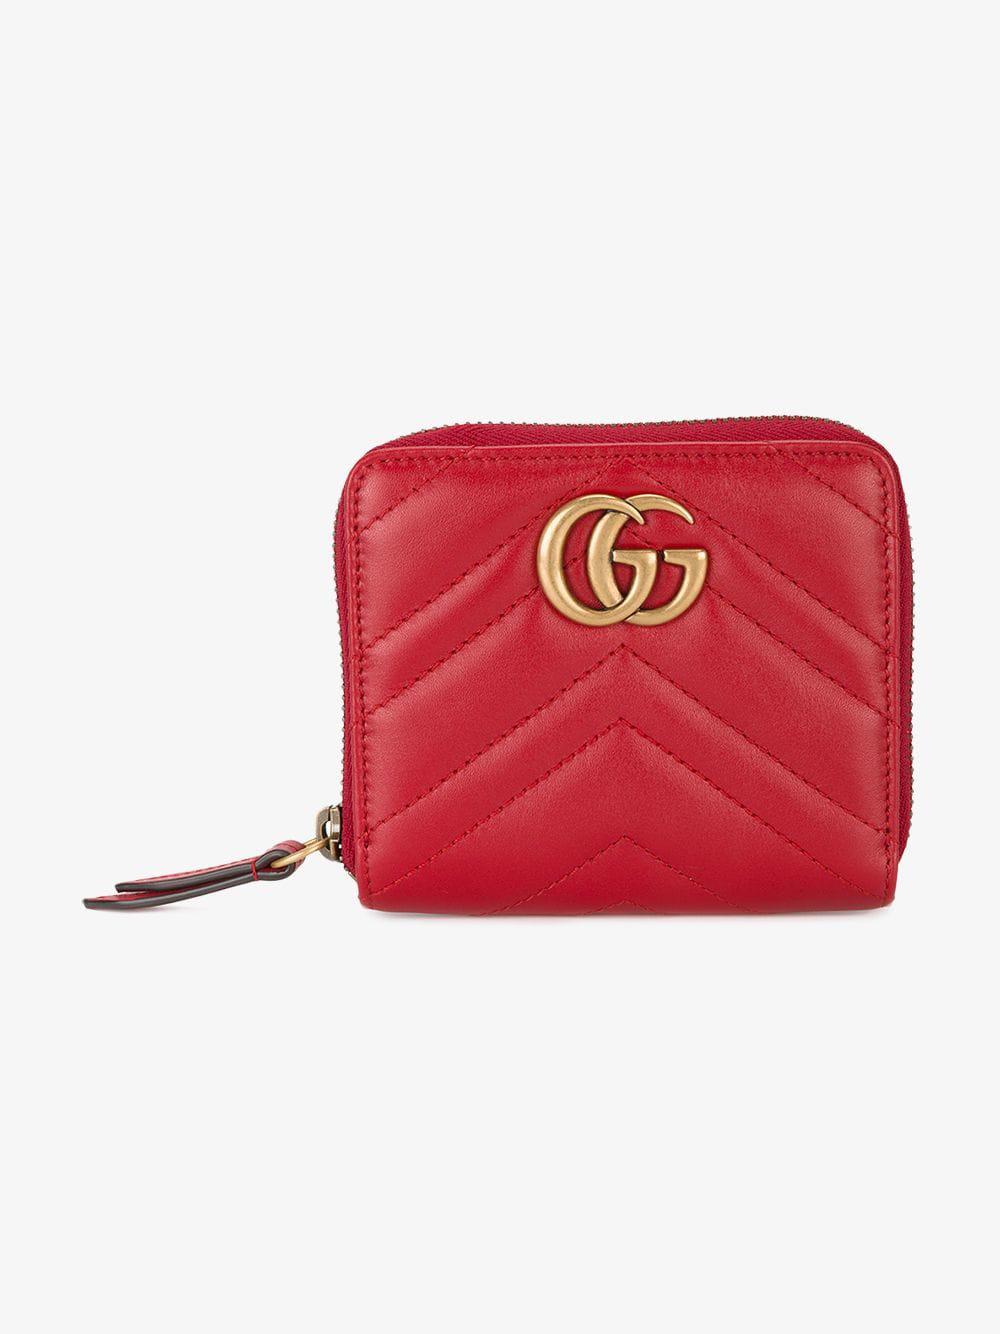 Gucci Leather Small Marmont Zip Around Wallet in Red - Save 29% - Lyst